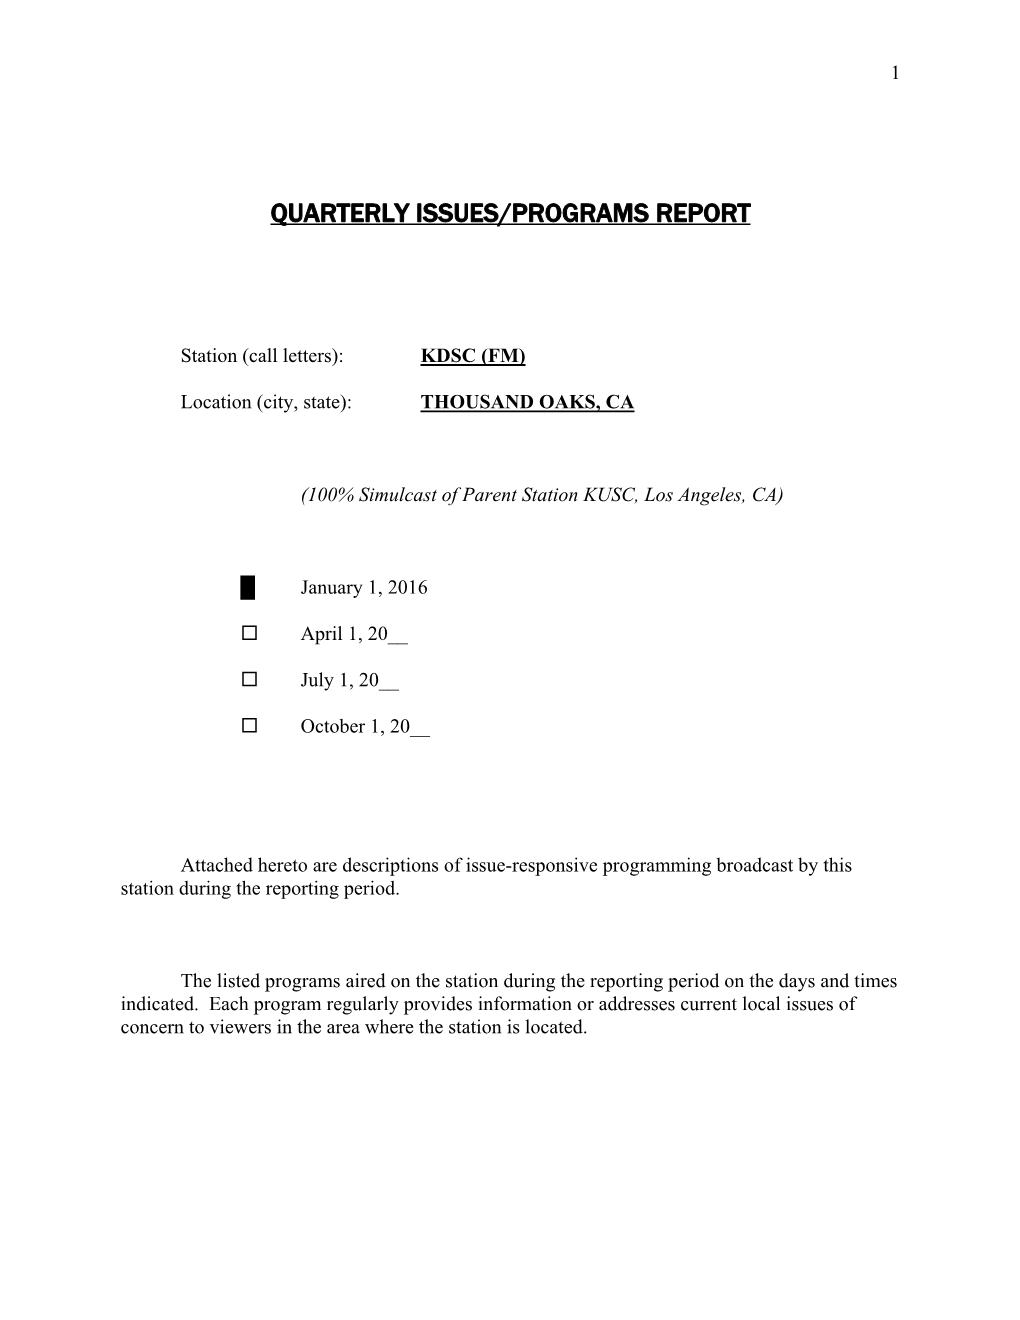 Quarterly Issues/Programs Report